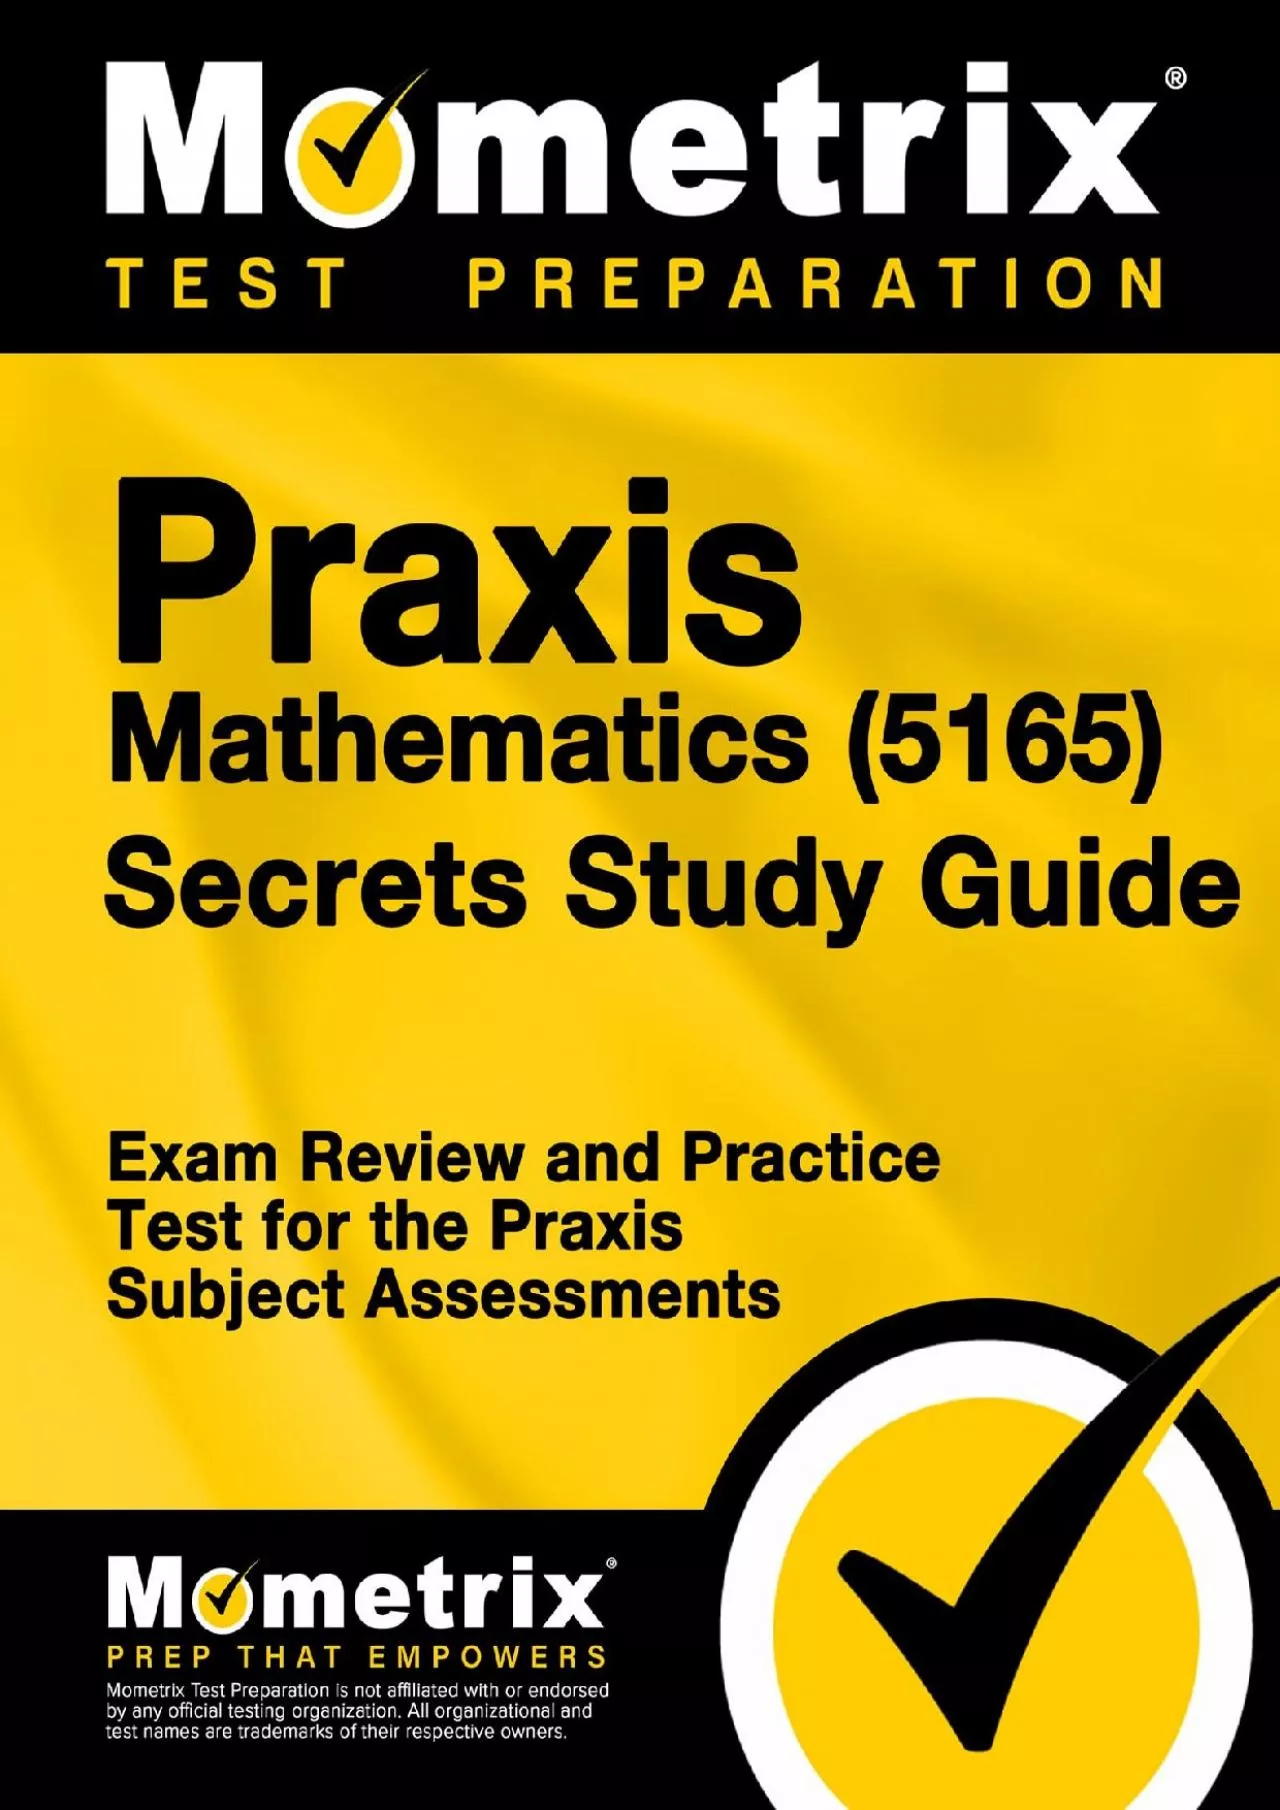 [EBOOK] Praxis Mathematics 5165 Secrets Study Guide: Exam Review and Practice Test for